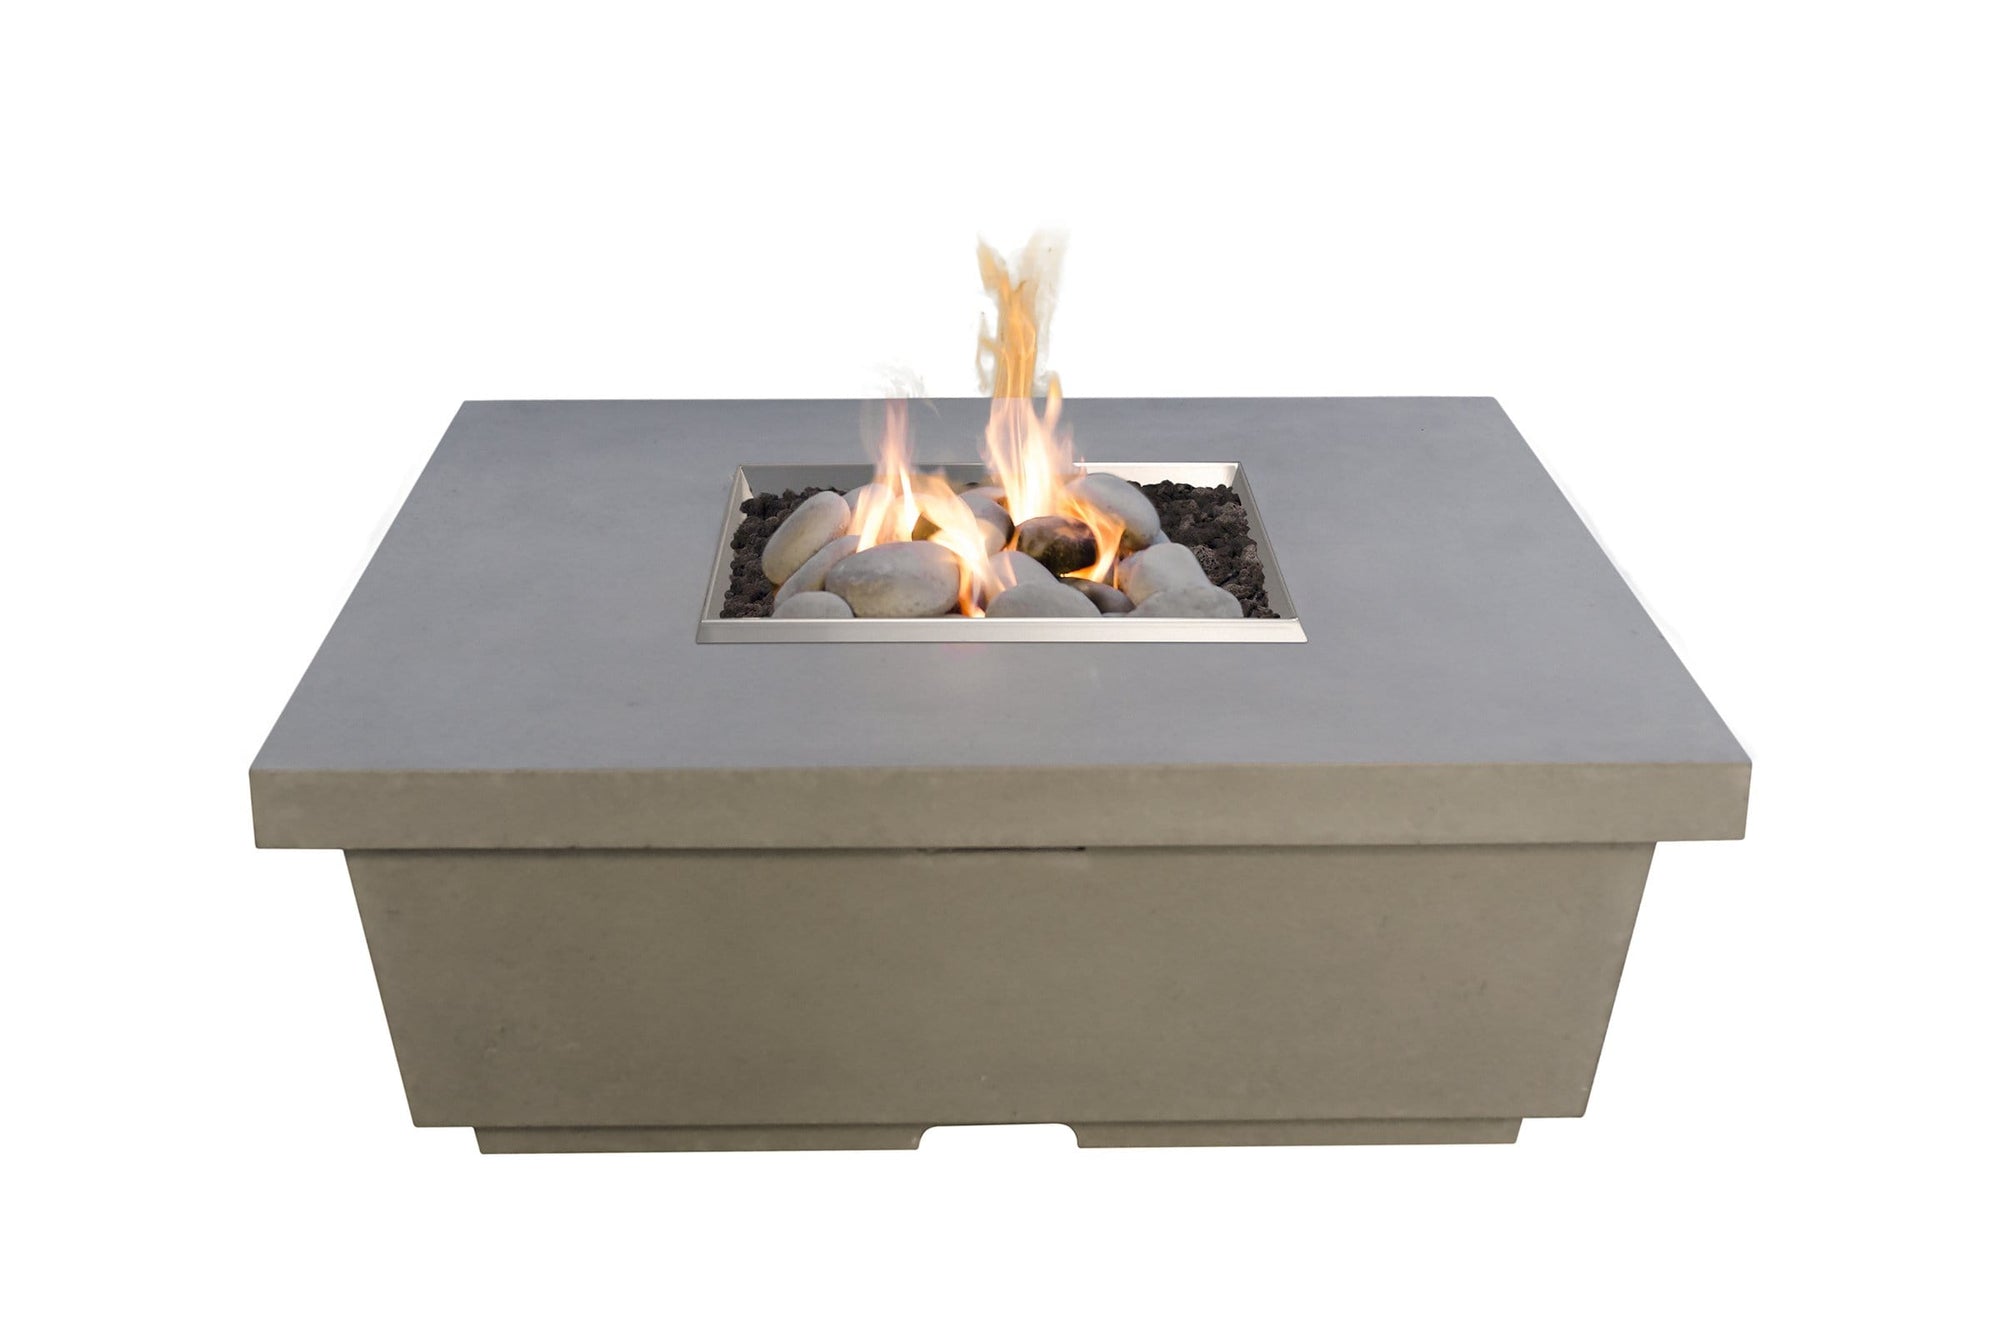 American Fyre Designs Fire Features American Fyre Designs 44" Contempo Square Gas Firetable / 784-xx-11-M2NC, 784-xx-11-M2PC, 784-xx-11-F2NC, or 784-xx-11-F2PC